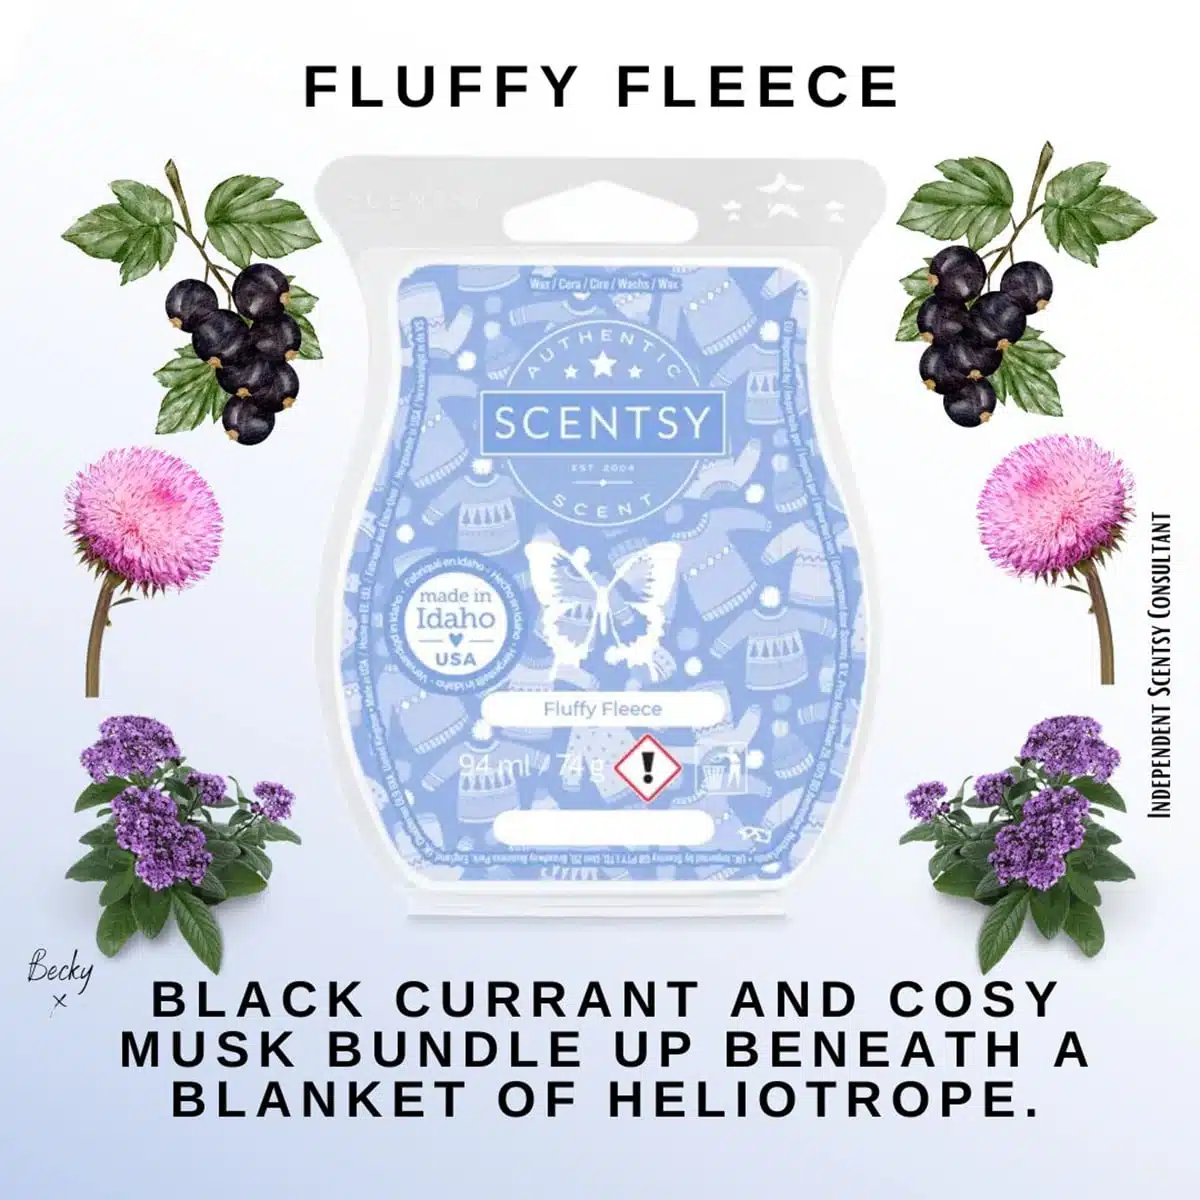 https://www.thecandleboutique.co.uk/wp-content/uploads/2021/10/Fluffy-Fleece-Scentsy-Wax-Bar-1.jpg